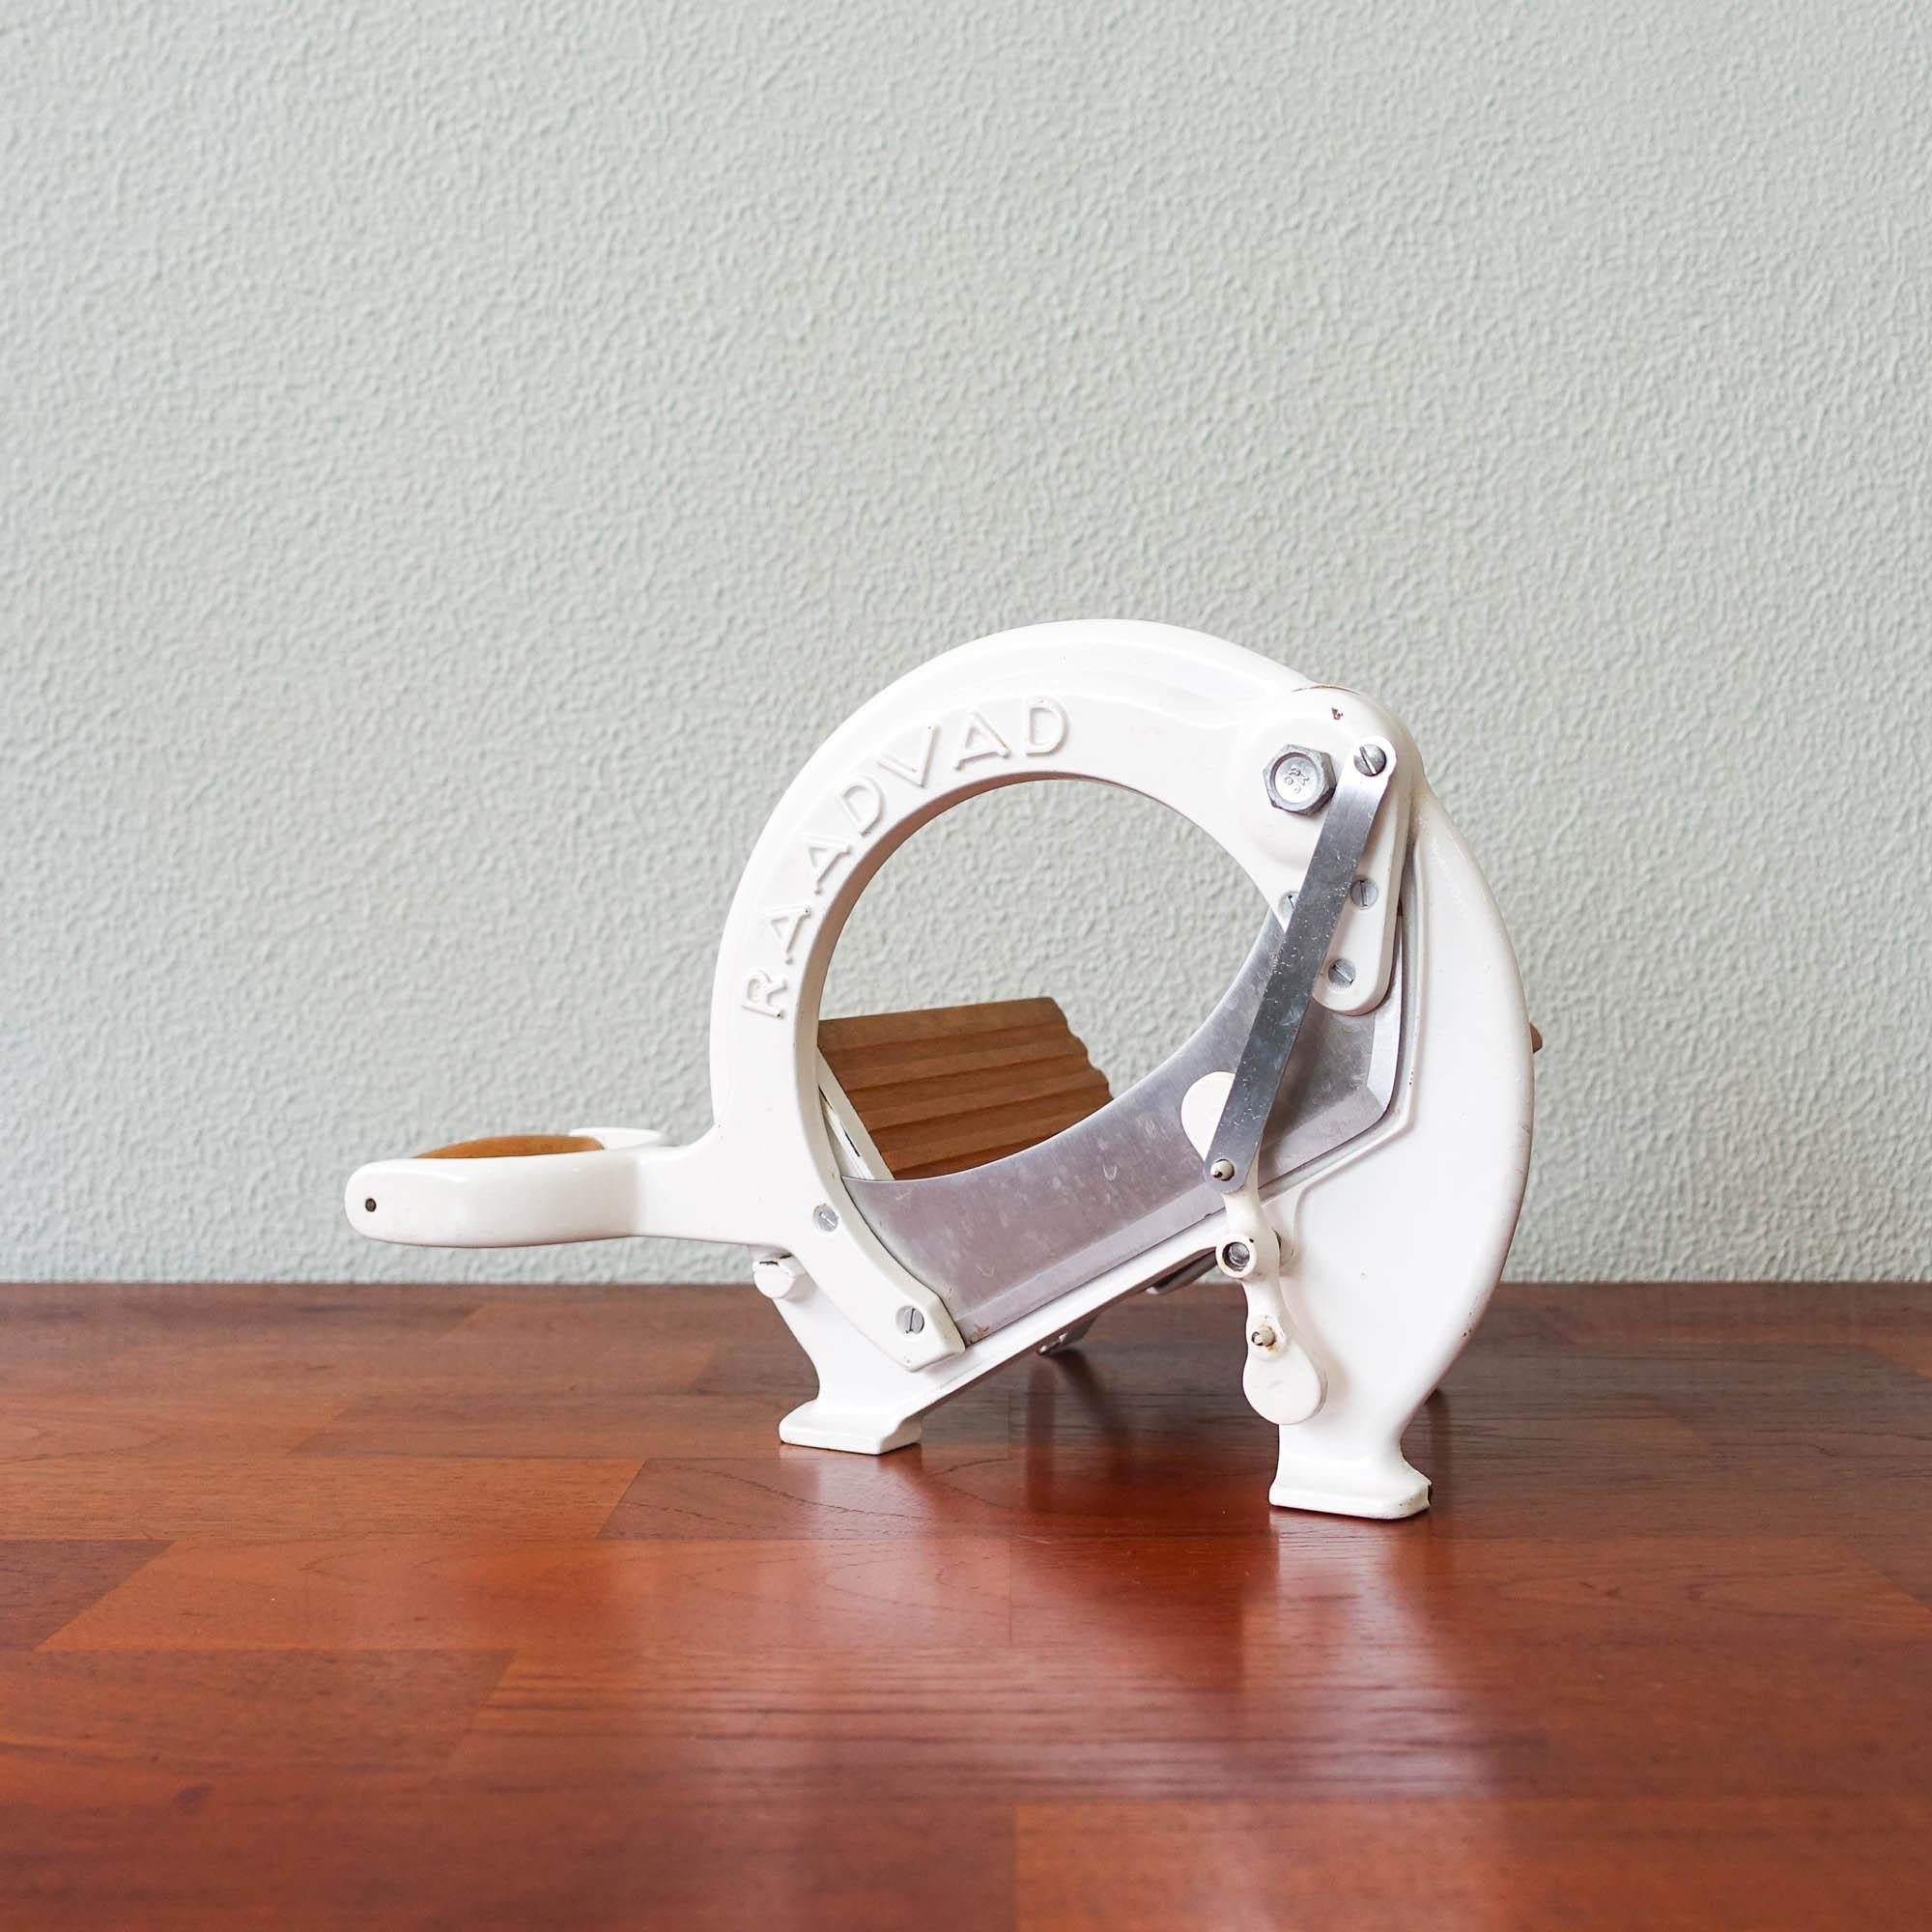 This bread slicer, model 294, was designed by Ove Larsen and produced by Raadvad in Denmark, during the 1970s. It comes with the original white lacquer. The bread slicer is fully functional for slicing bread and is at the same time very decorative.